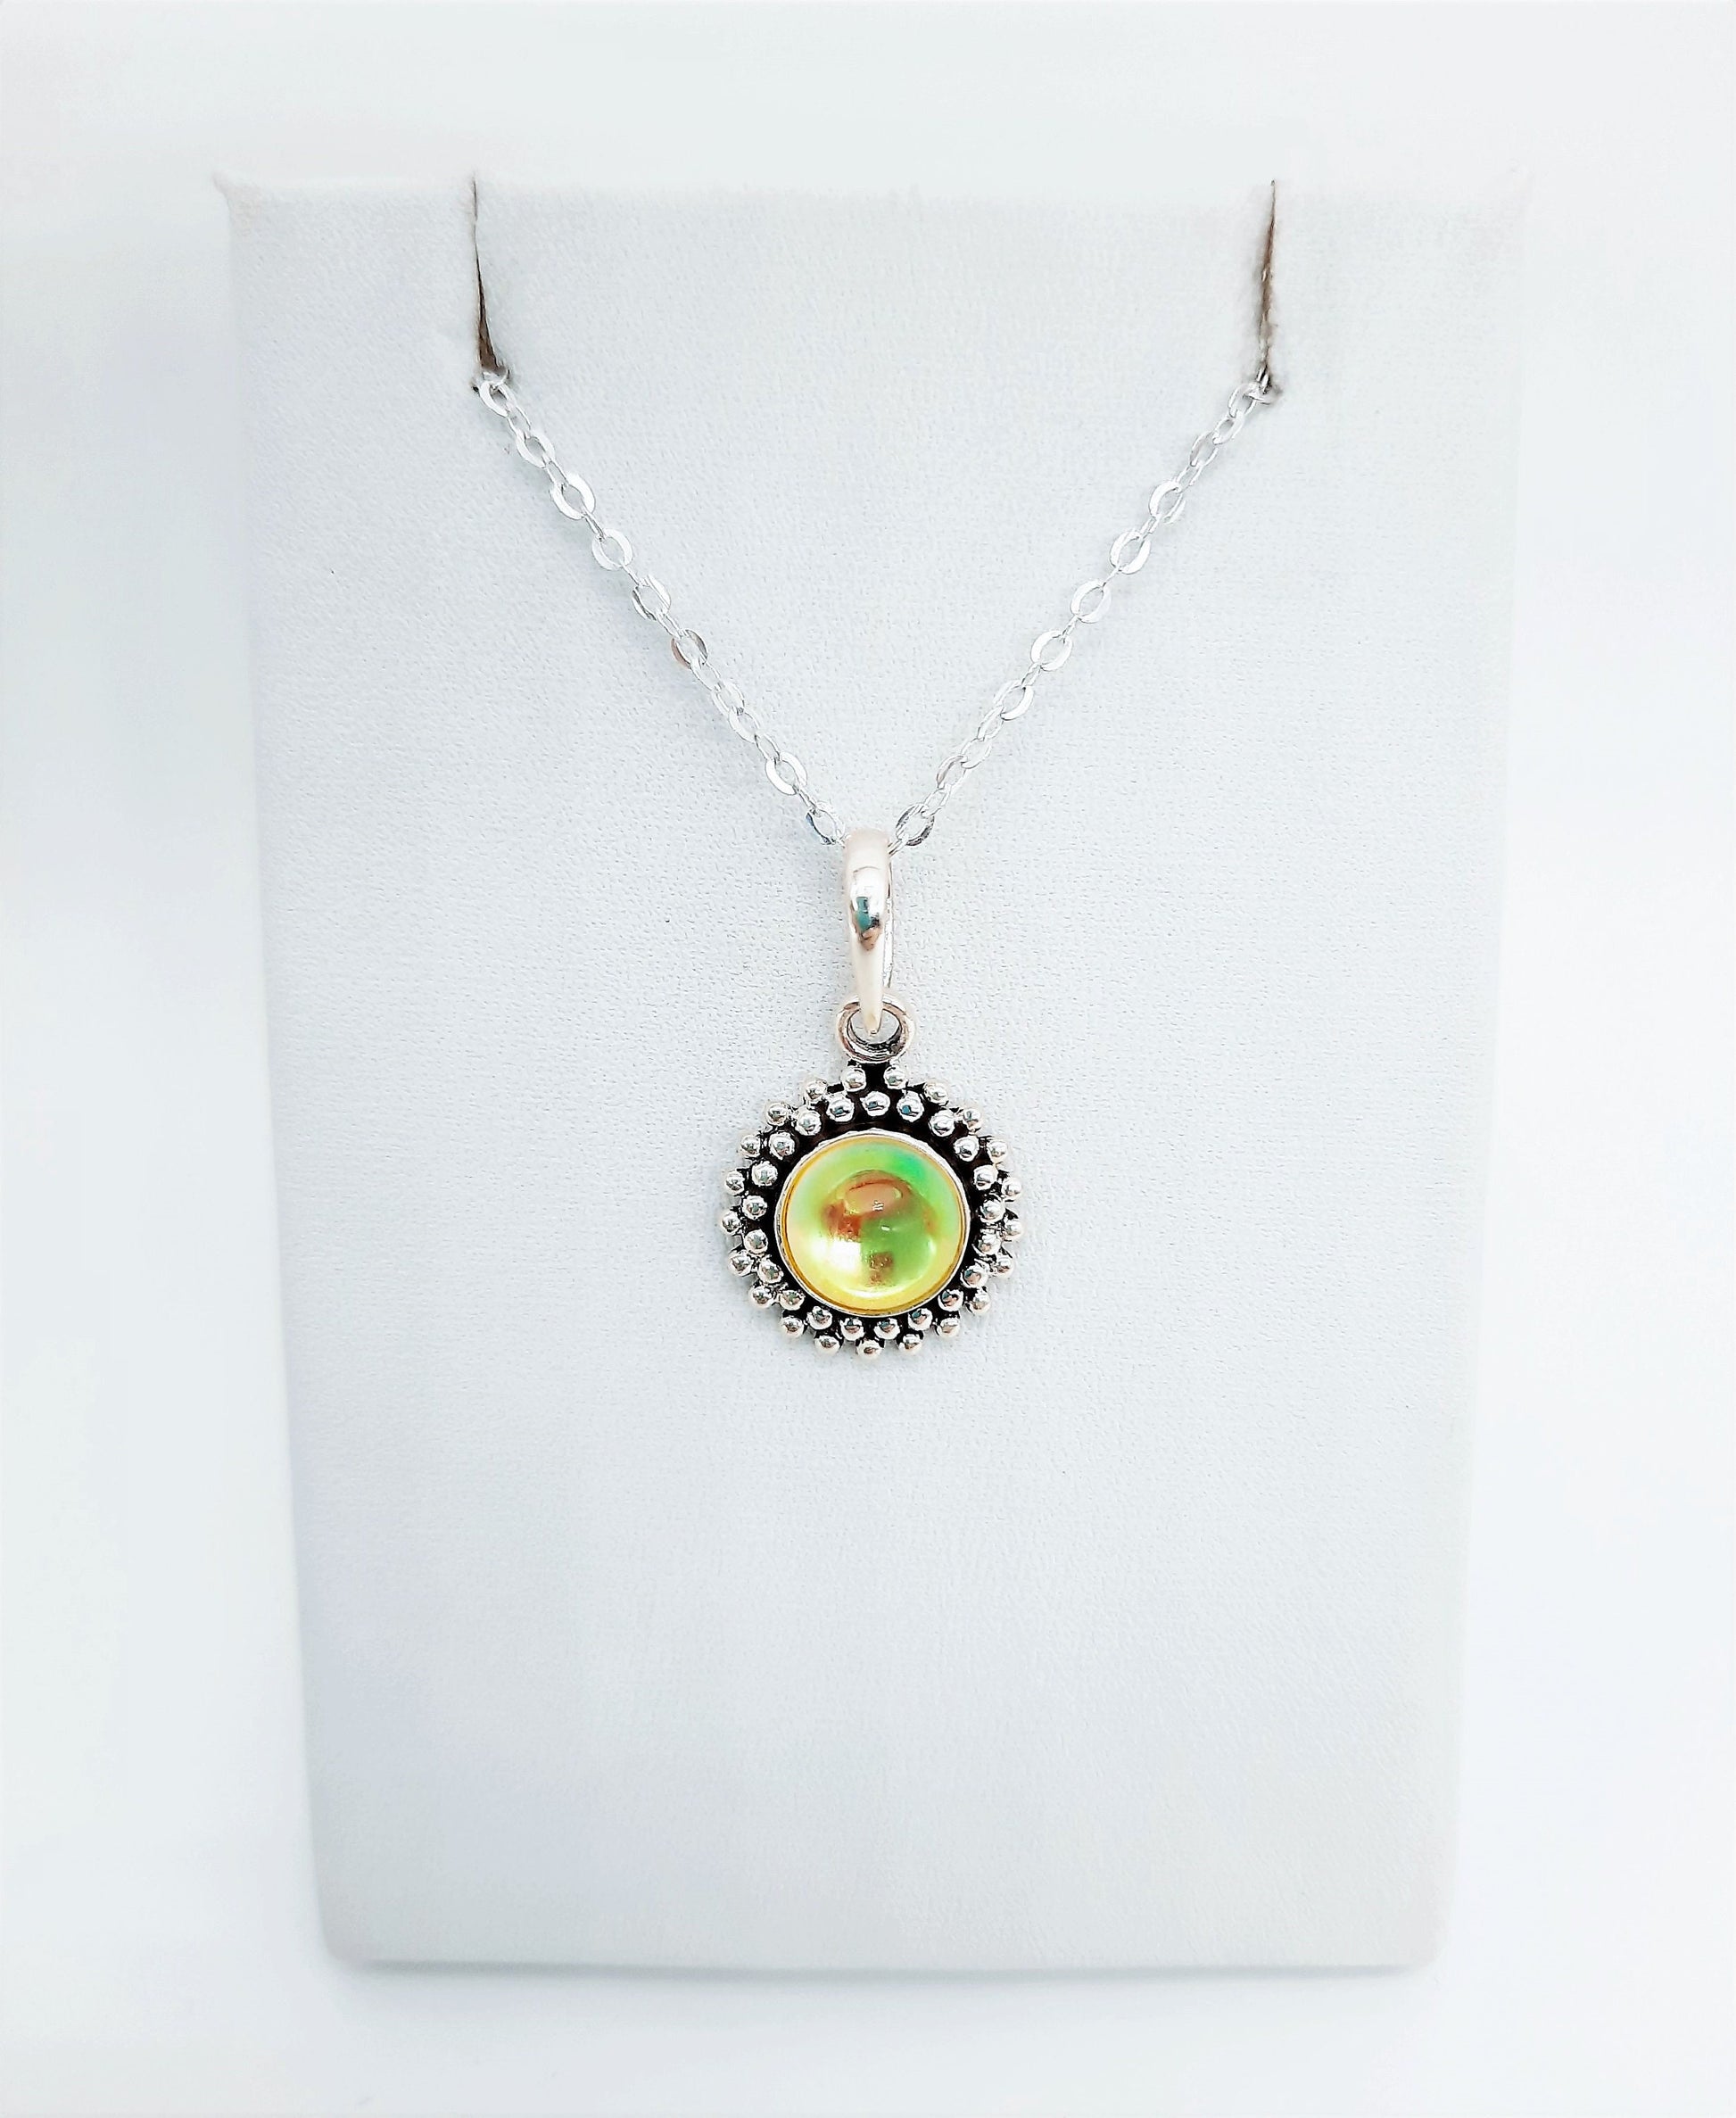 Antiqued Double Sunburst Design 925 Sterling Silver Pendant Necklace with 8mm Translucent Mirror Ball Yellow Glass Cabochon Setting